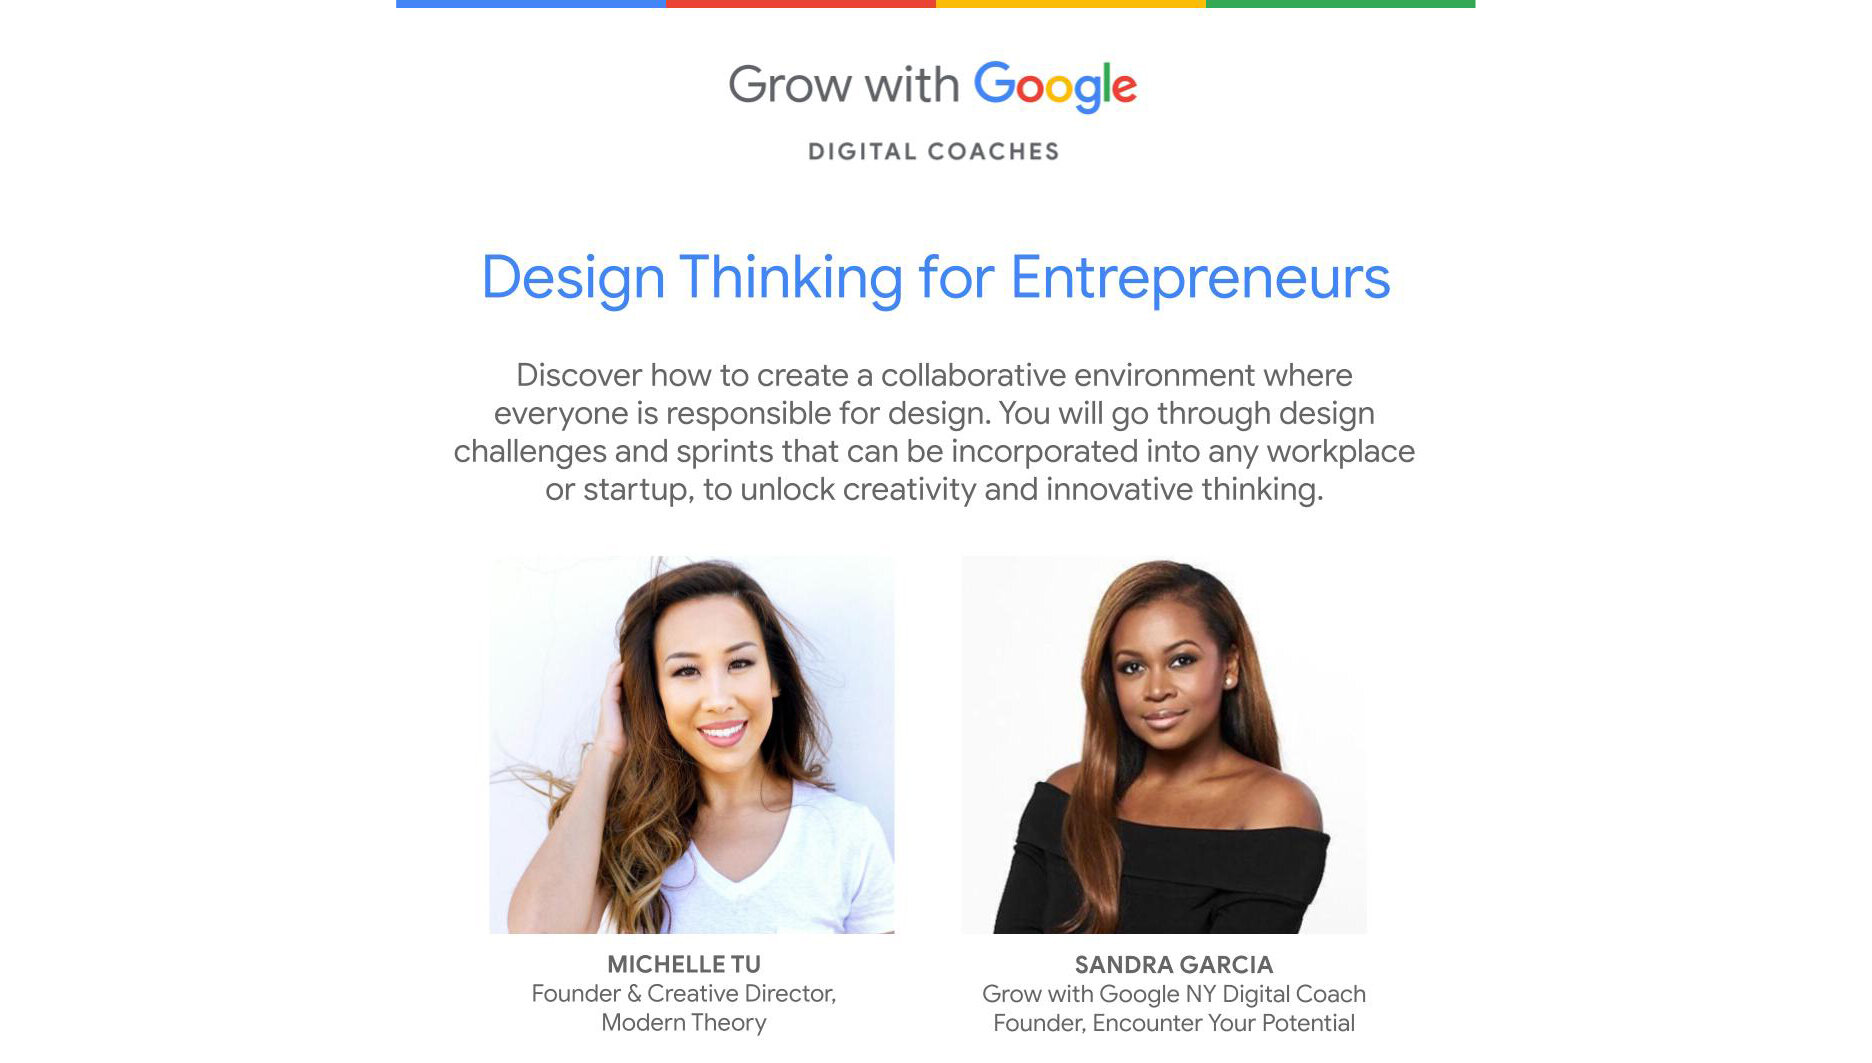 Grow with Google event